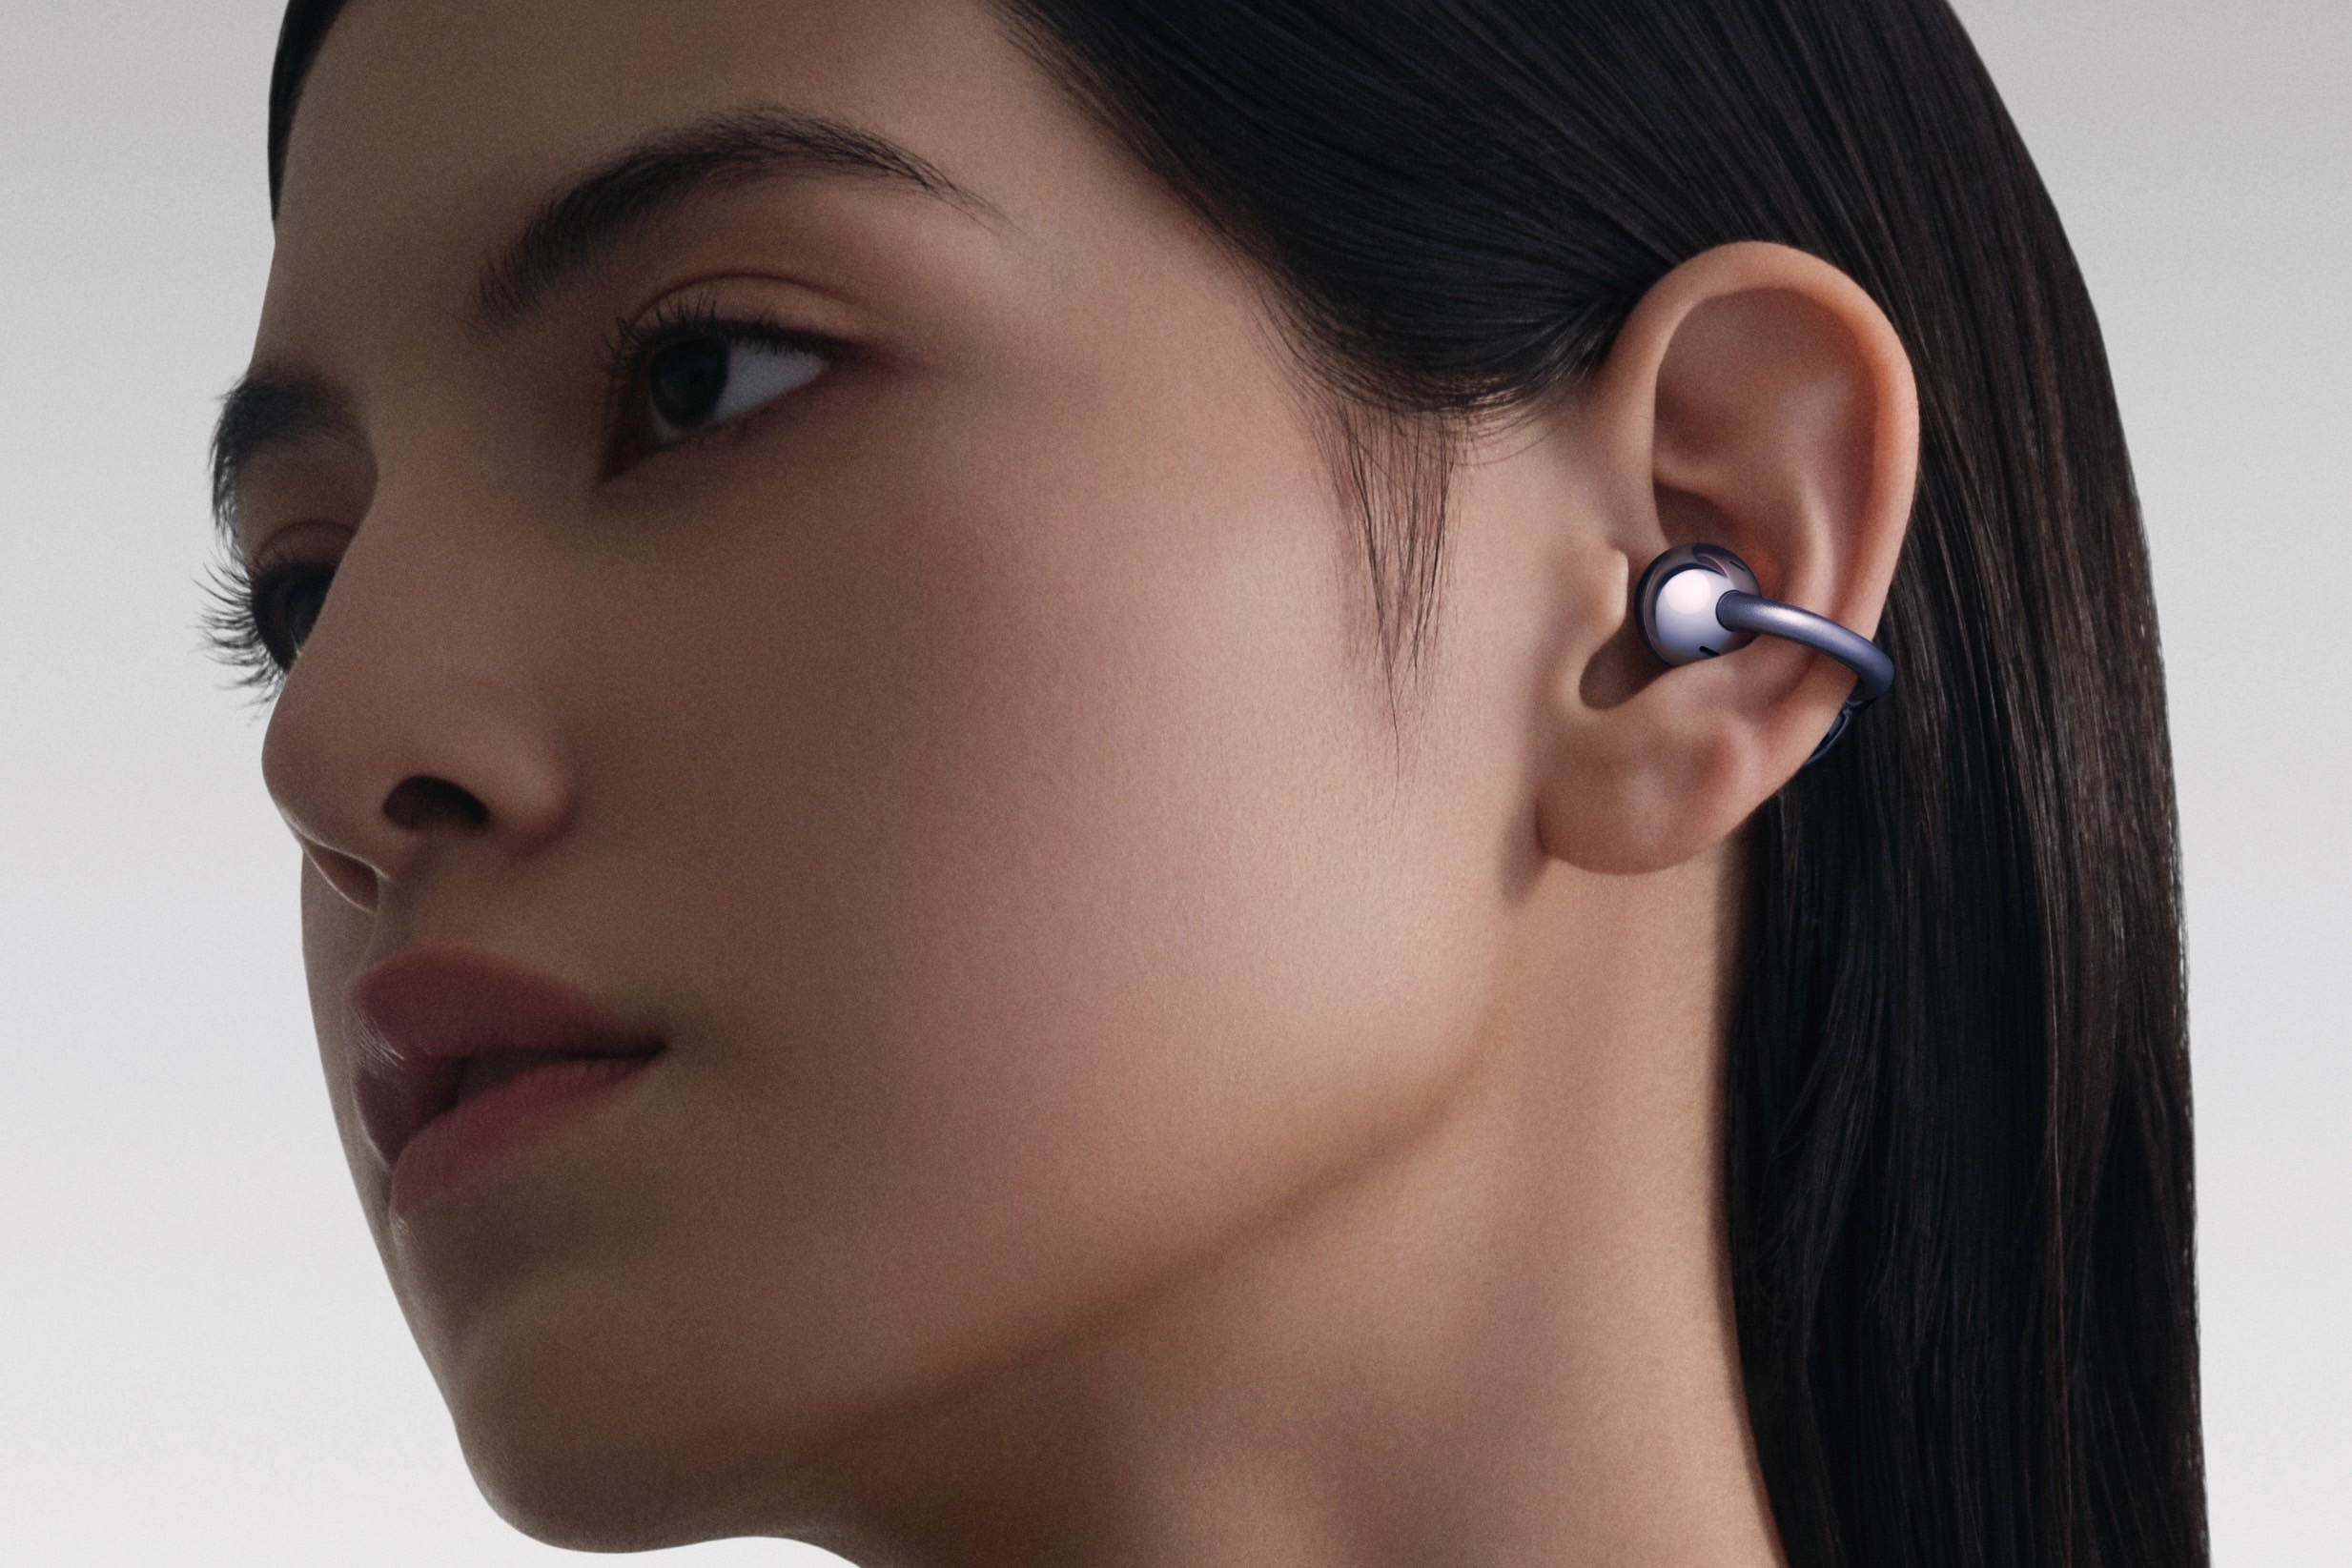 The Huawei FreeClip have an unusual, innovative open ear earbuds